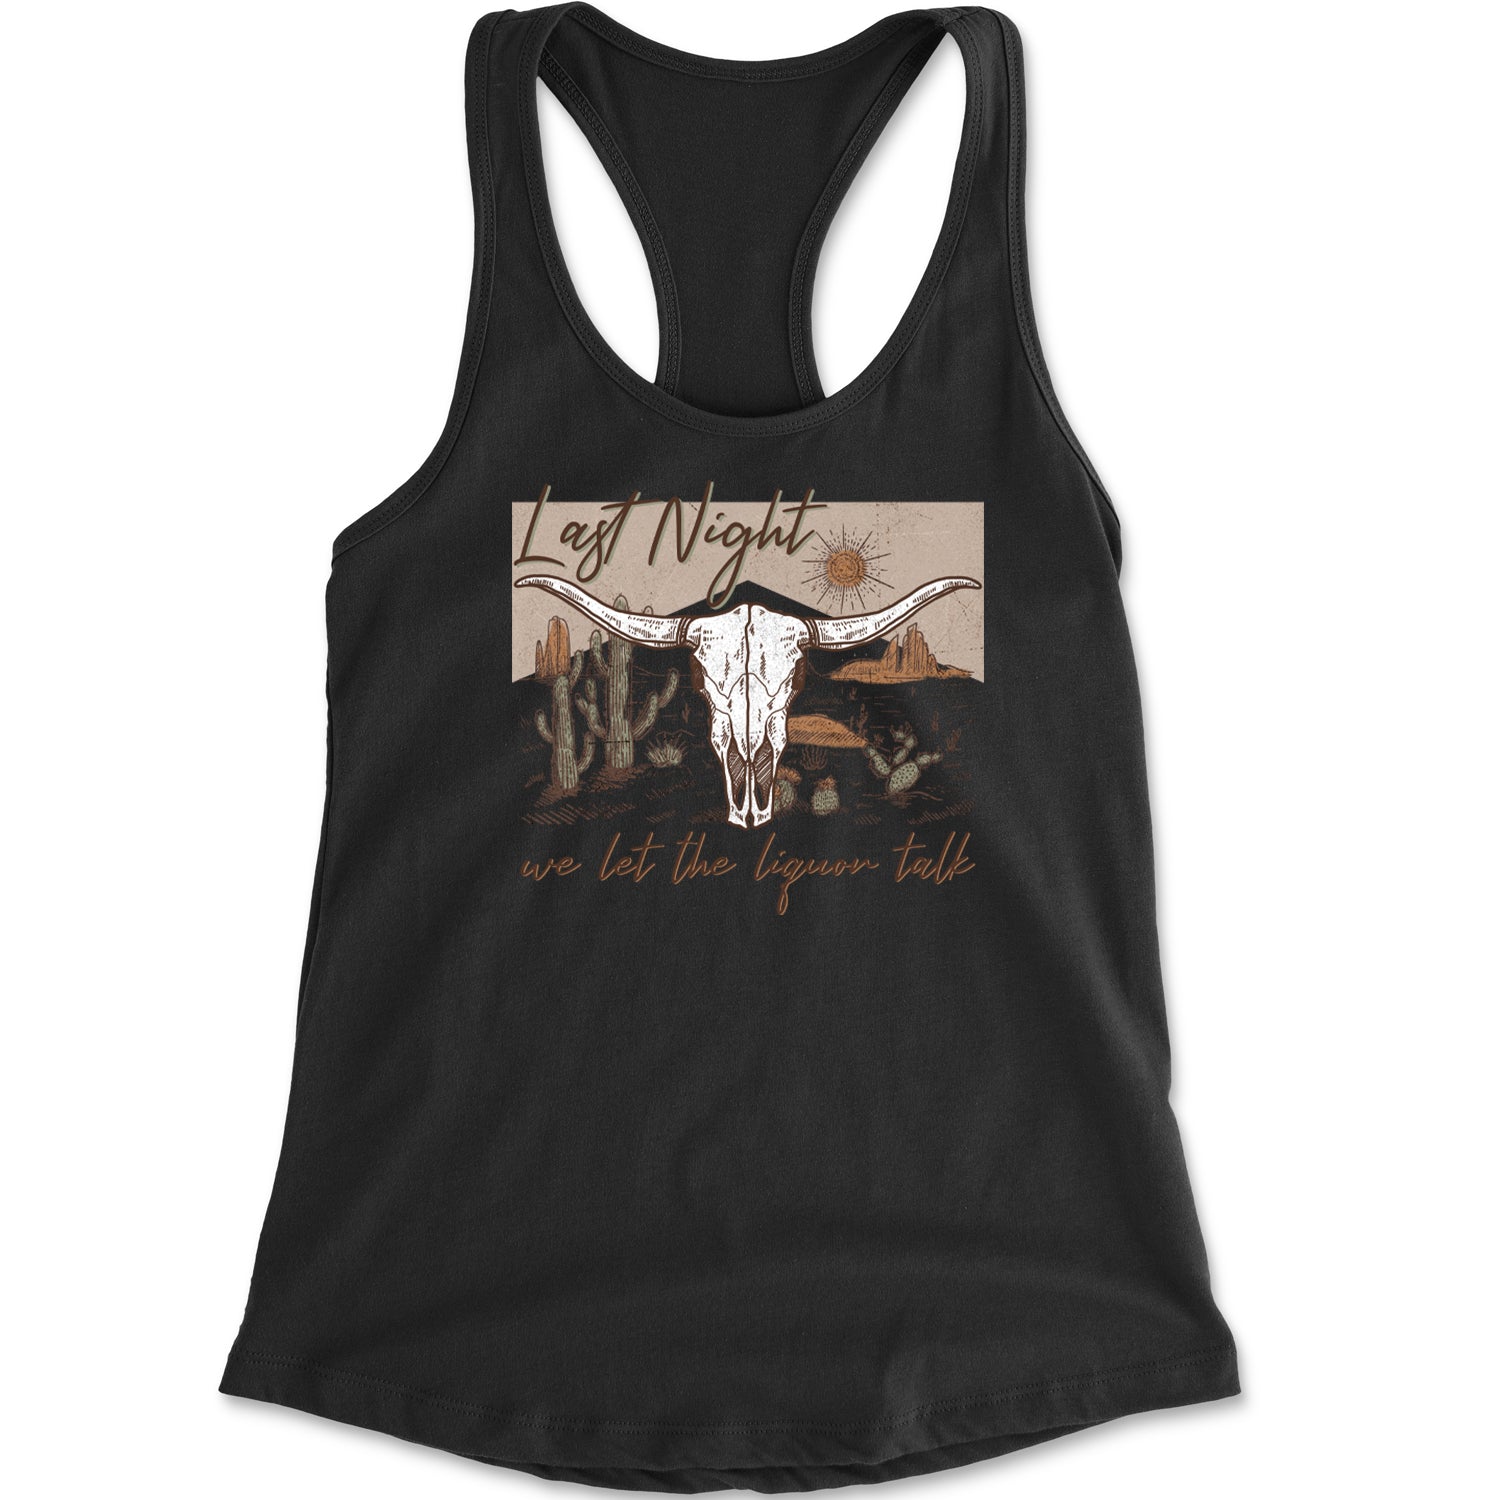 Last Night We Let The Liquor Talk Country Music Western Racerback Tank Top for Women